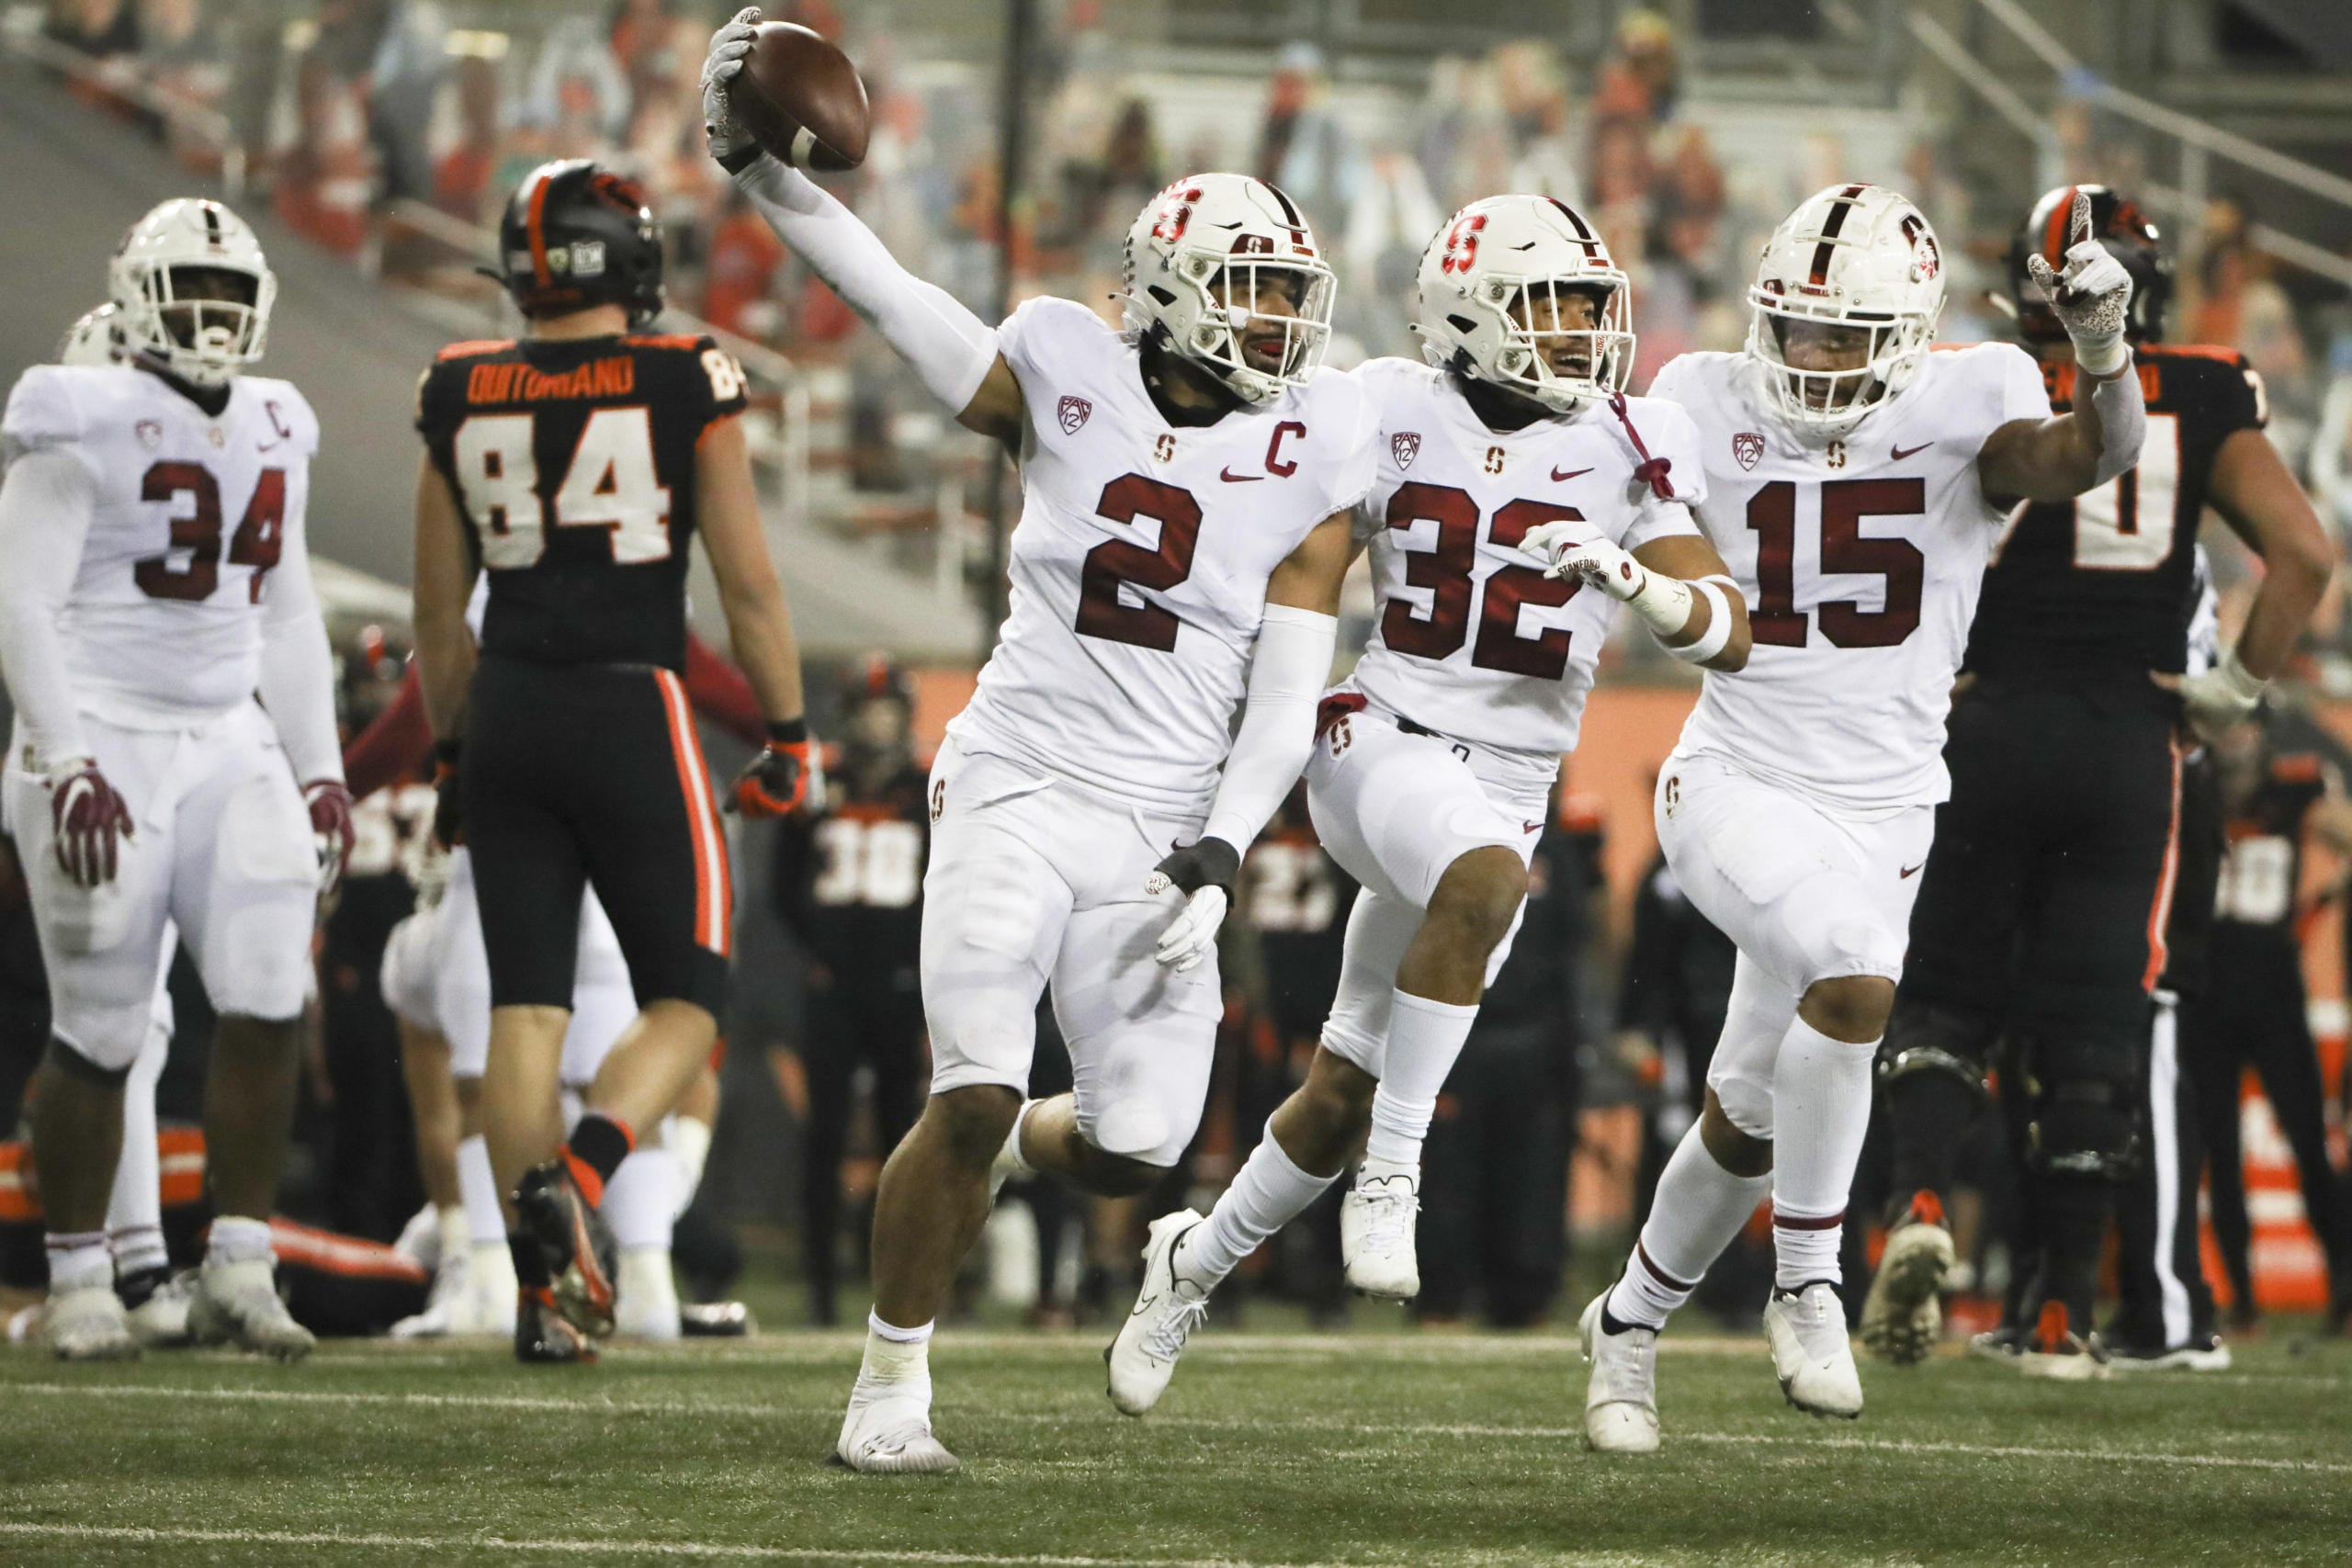 Stanford's Curtis Robinson (2), Jonathan McGill (32) and Stephen Herron (15) celebrate Robinson's recovery of an Oregon State fumble during the last minute of the second half in an NCAA college football game in Corvallis, Ore., Saturday, Dec. 12, 2020. Stanford won 27-24.